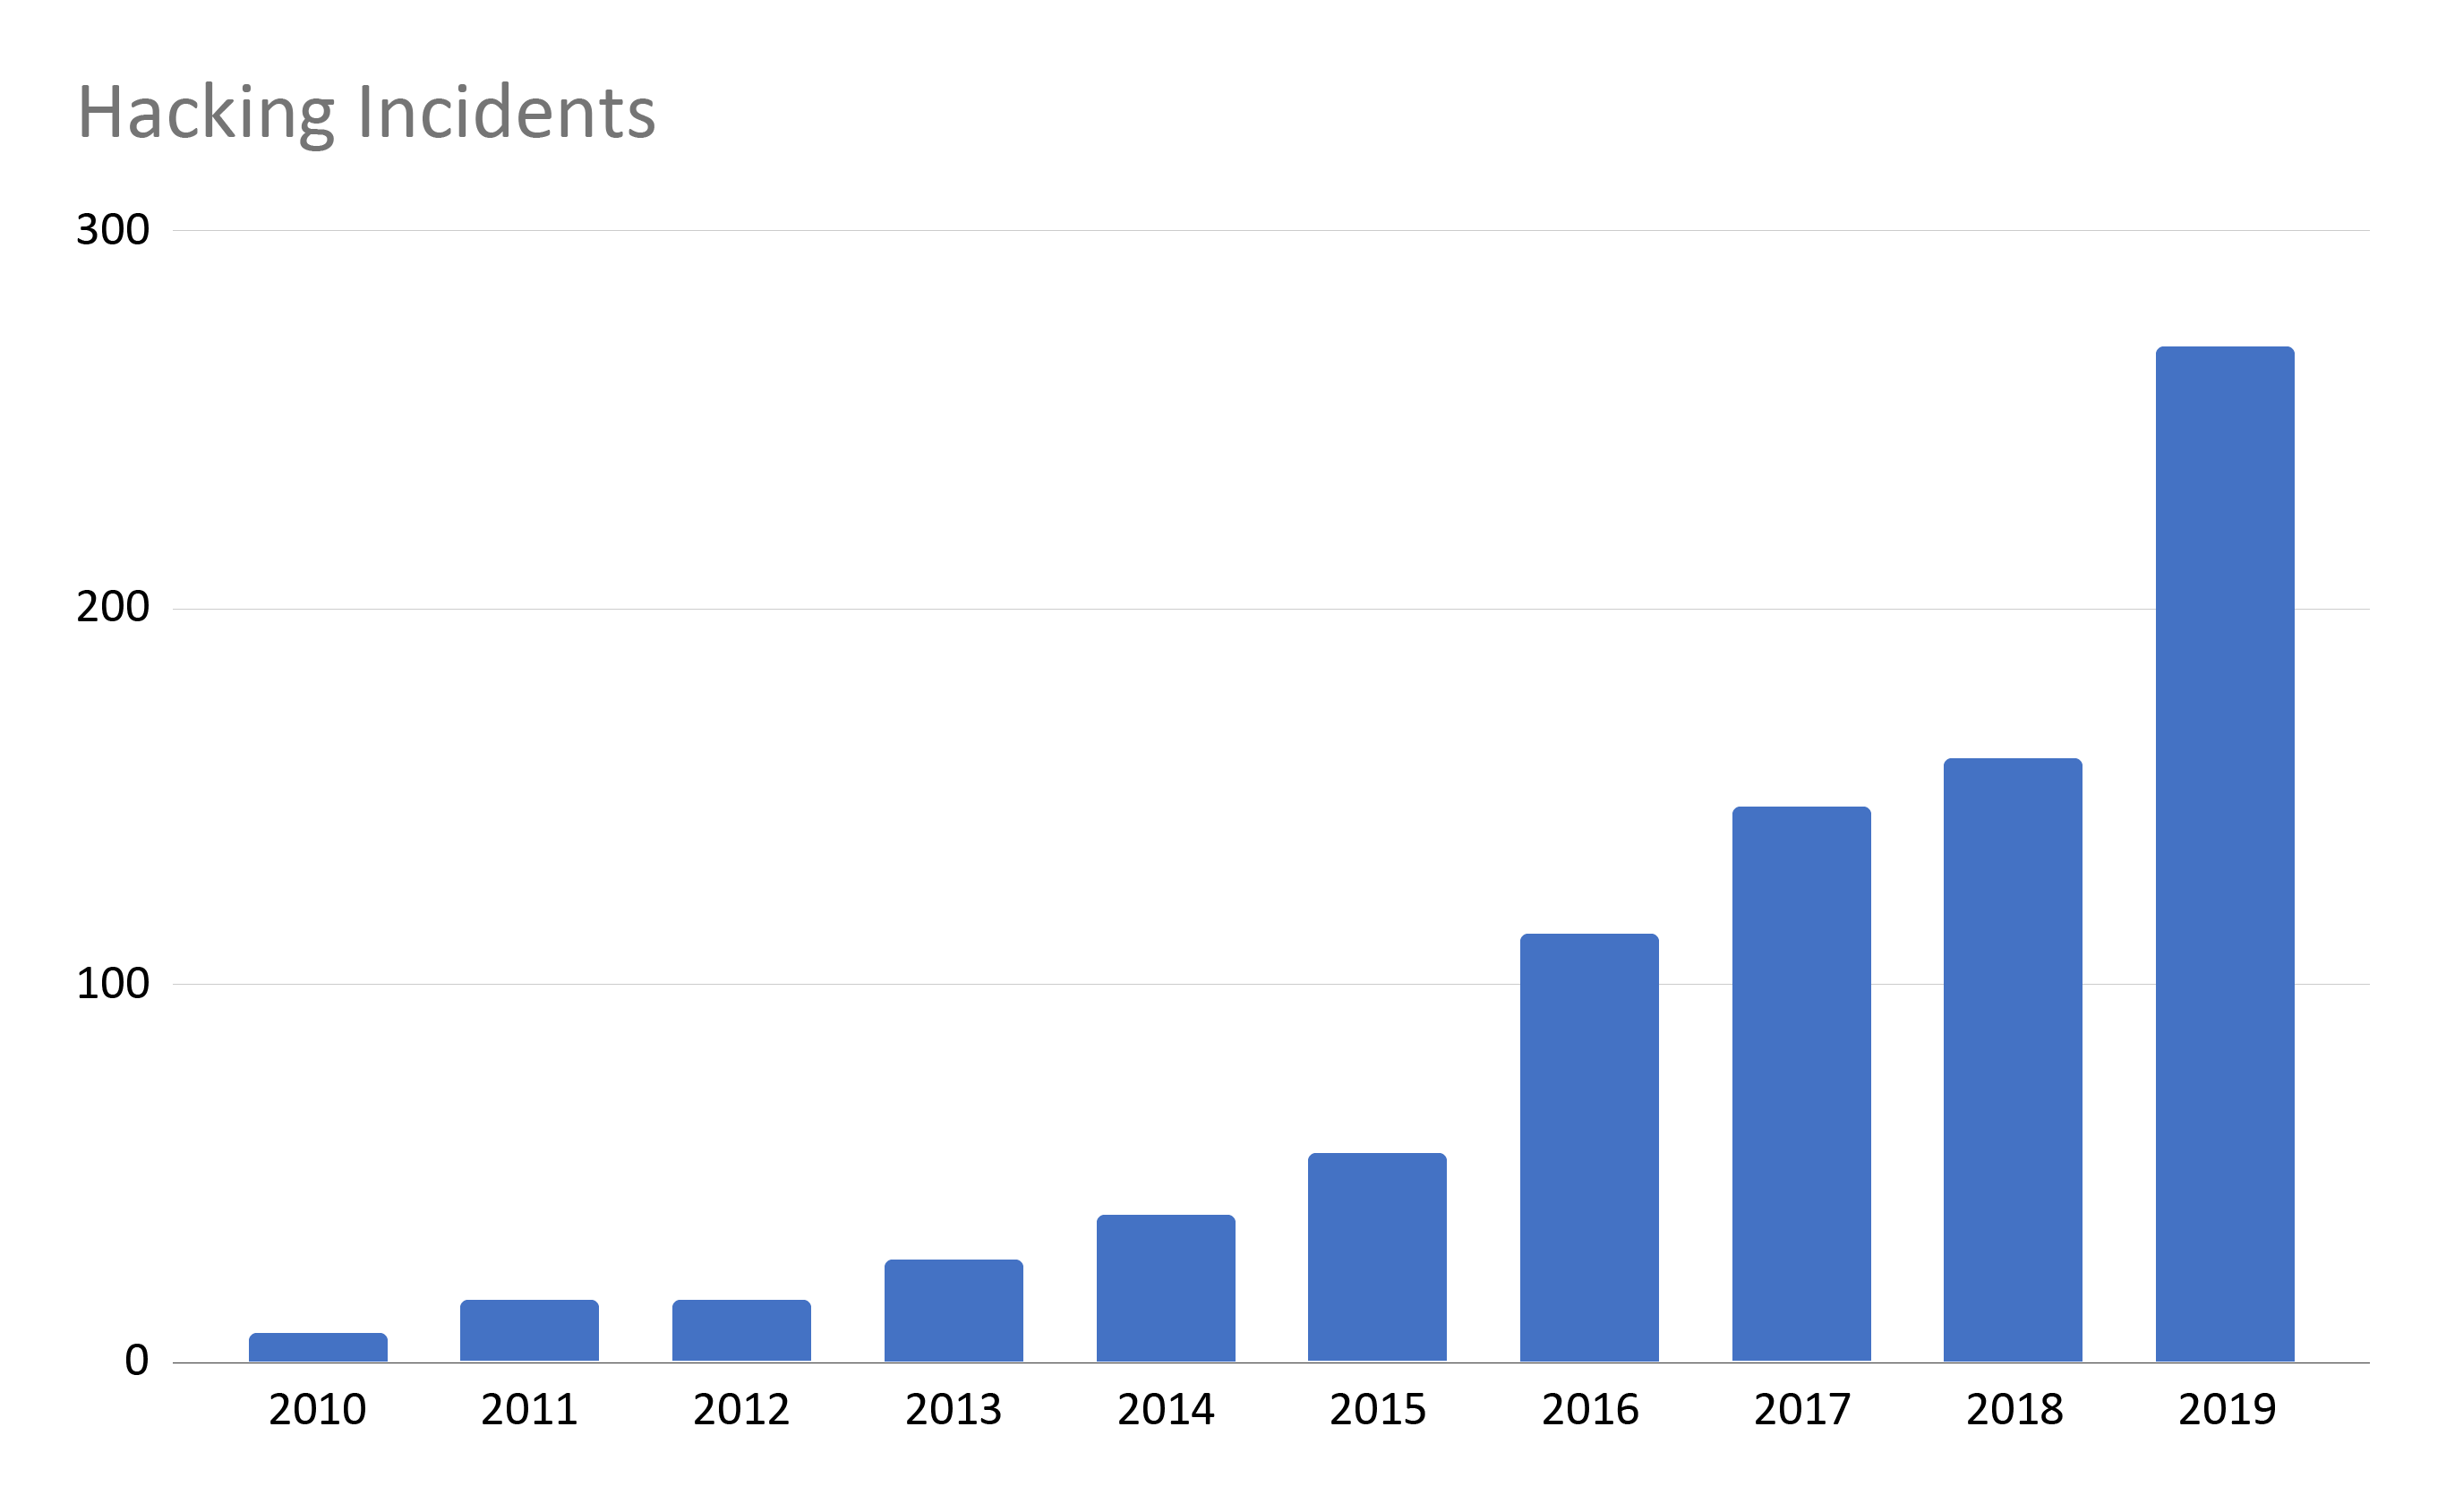 Hacking Incidents Over Time